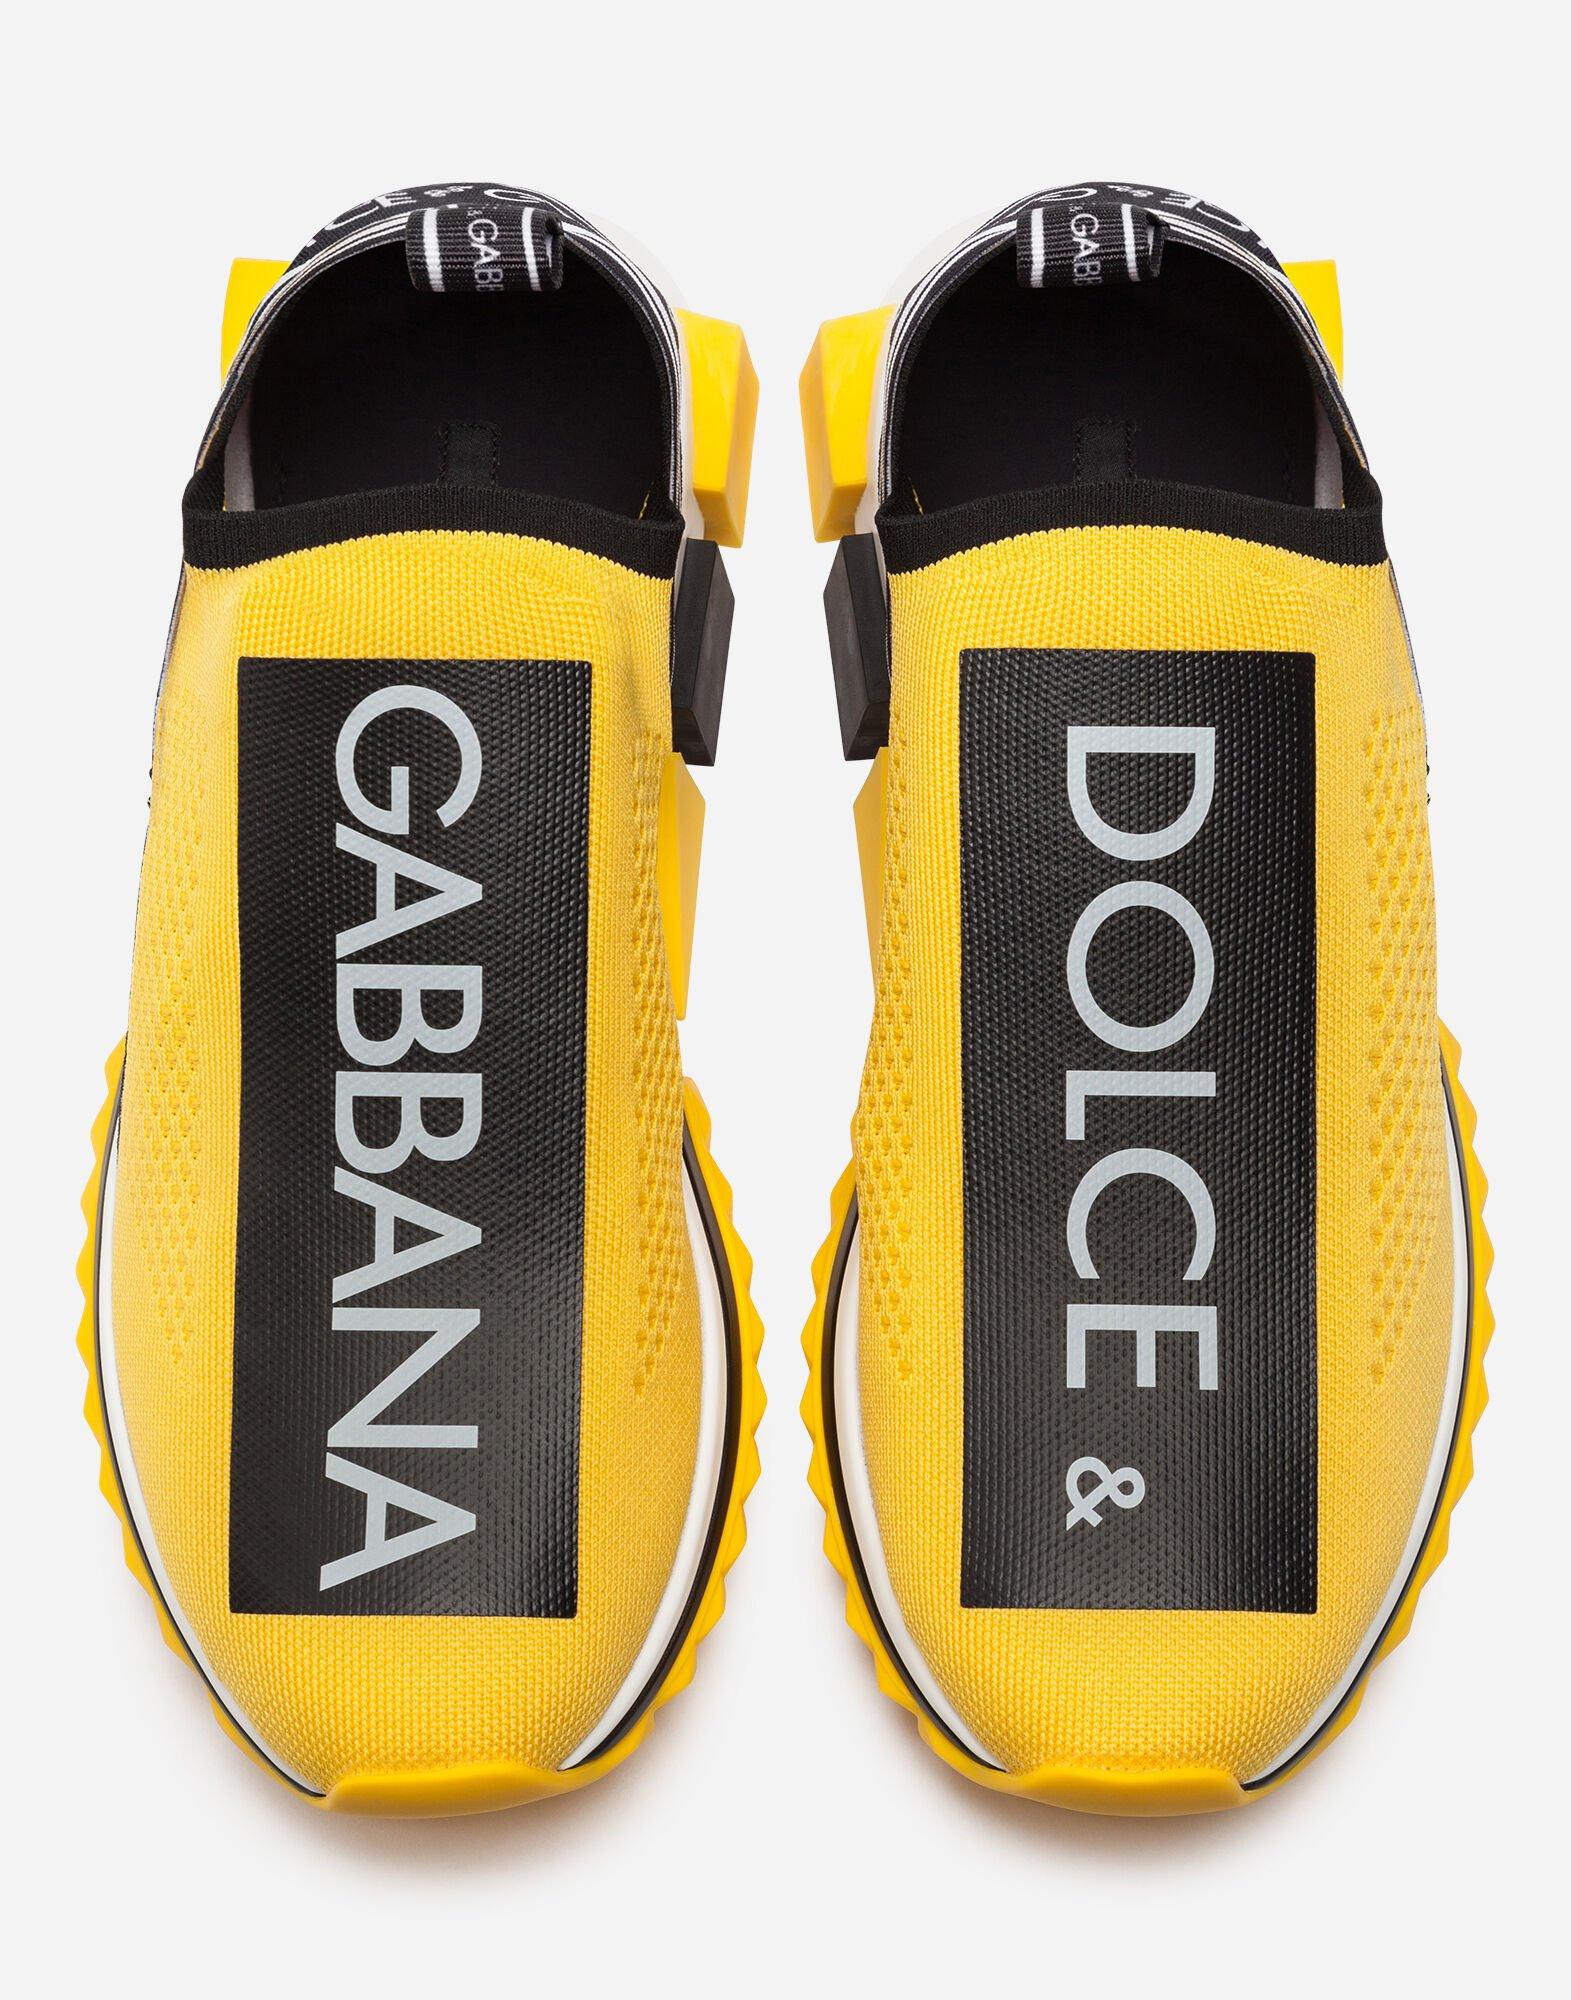 Dolce & Gabbana Branded Sorrento Sneakers in Yellow for Men - Lyst